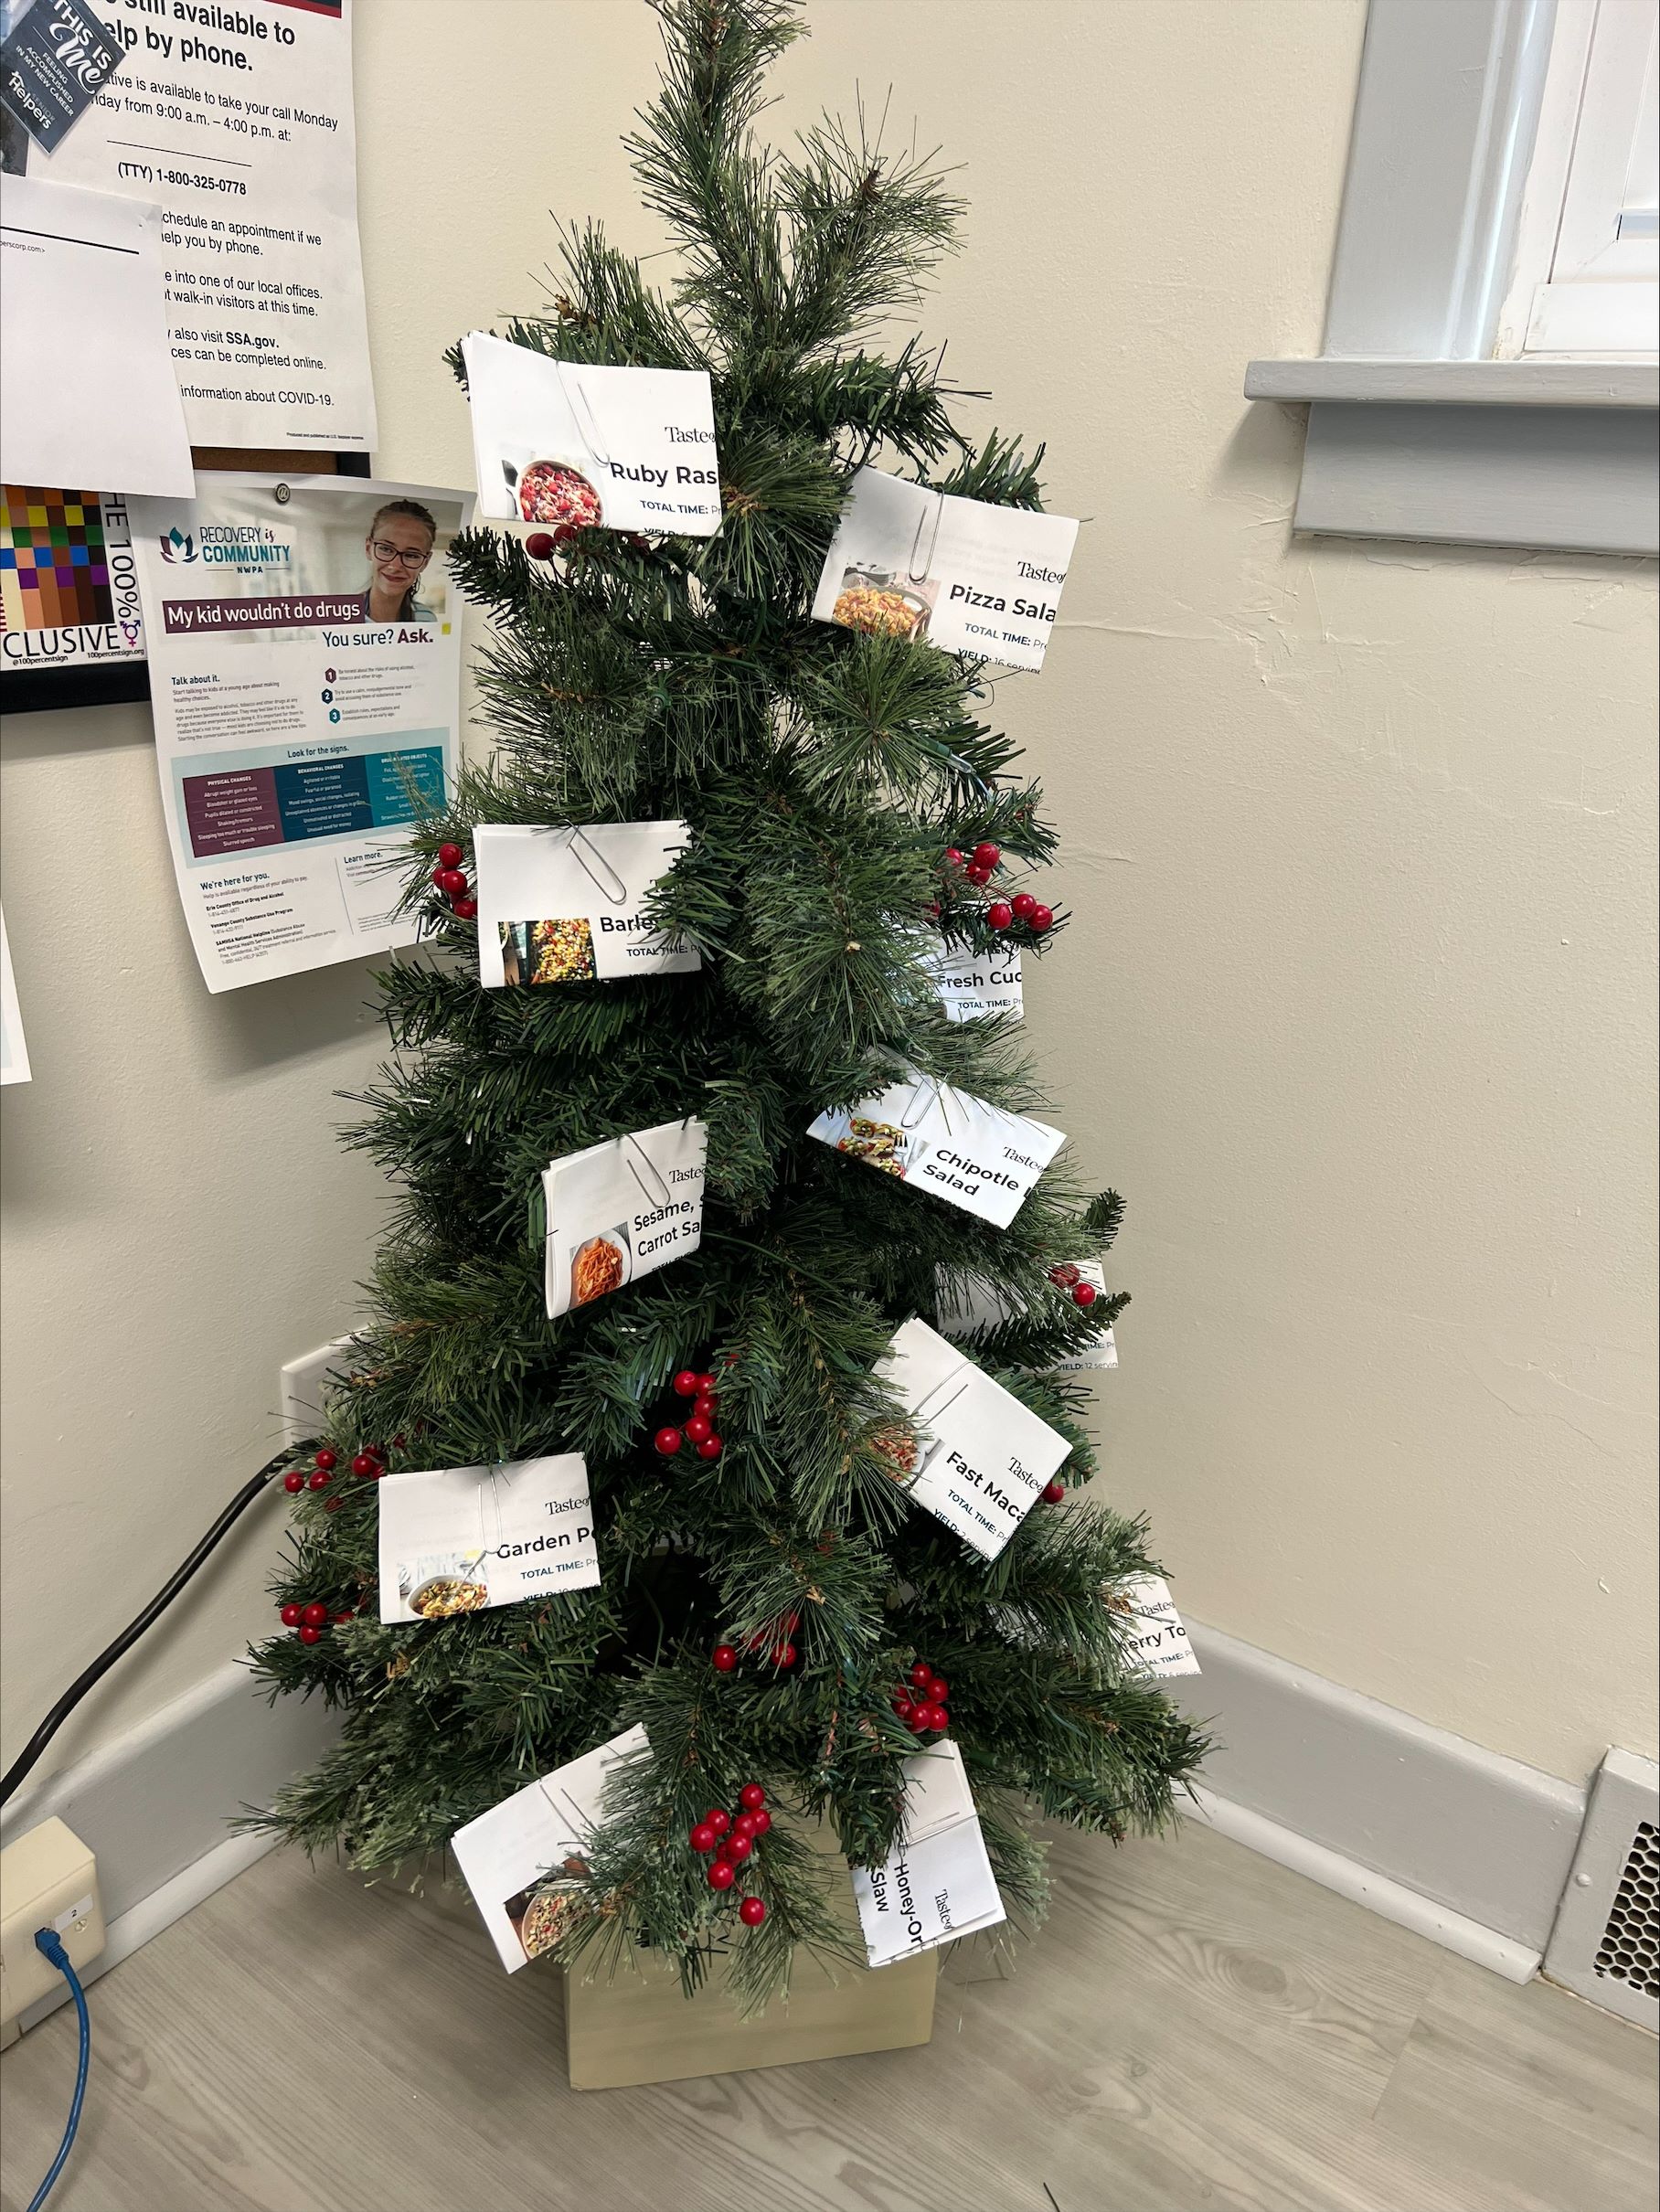 Check out our Recipe Tree